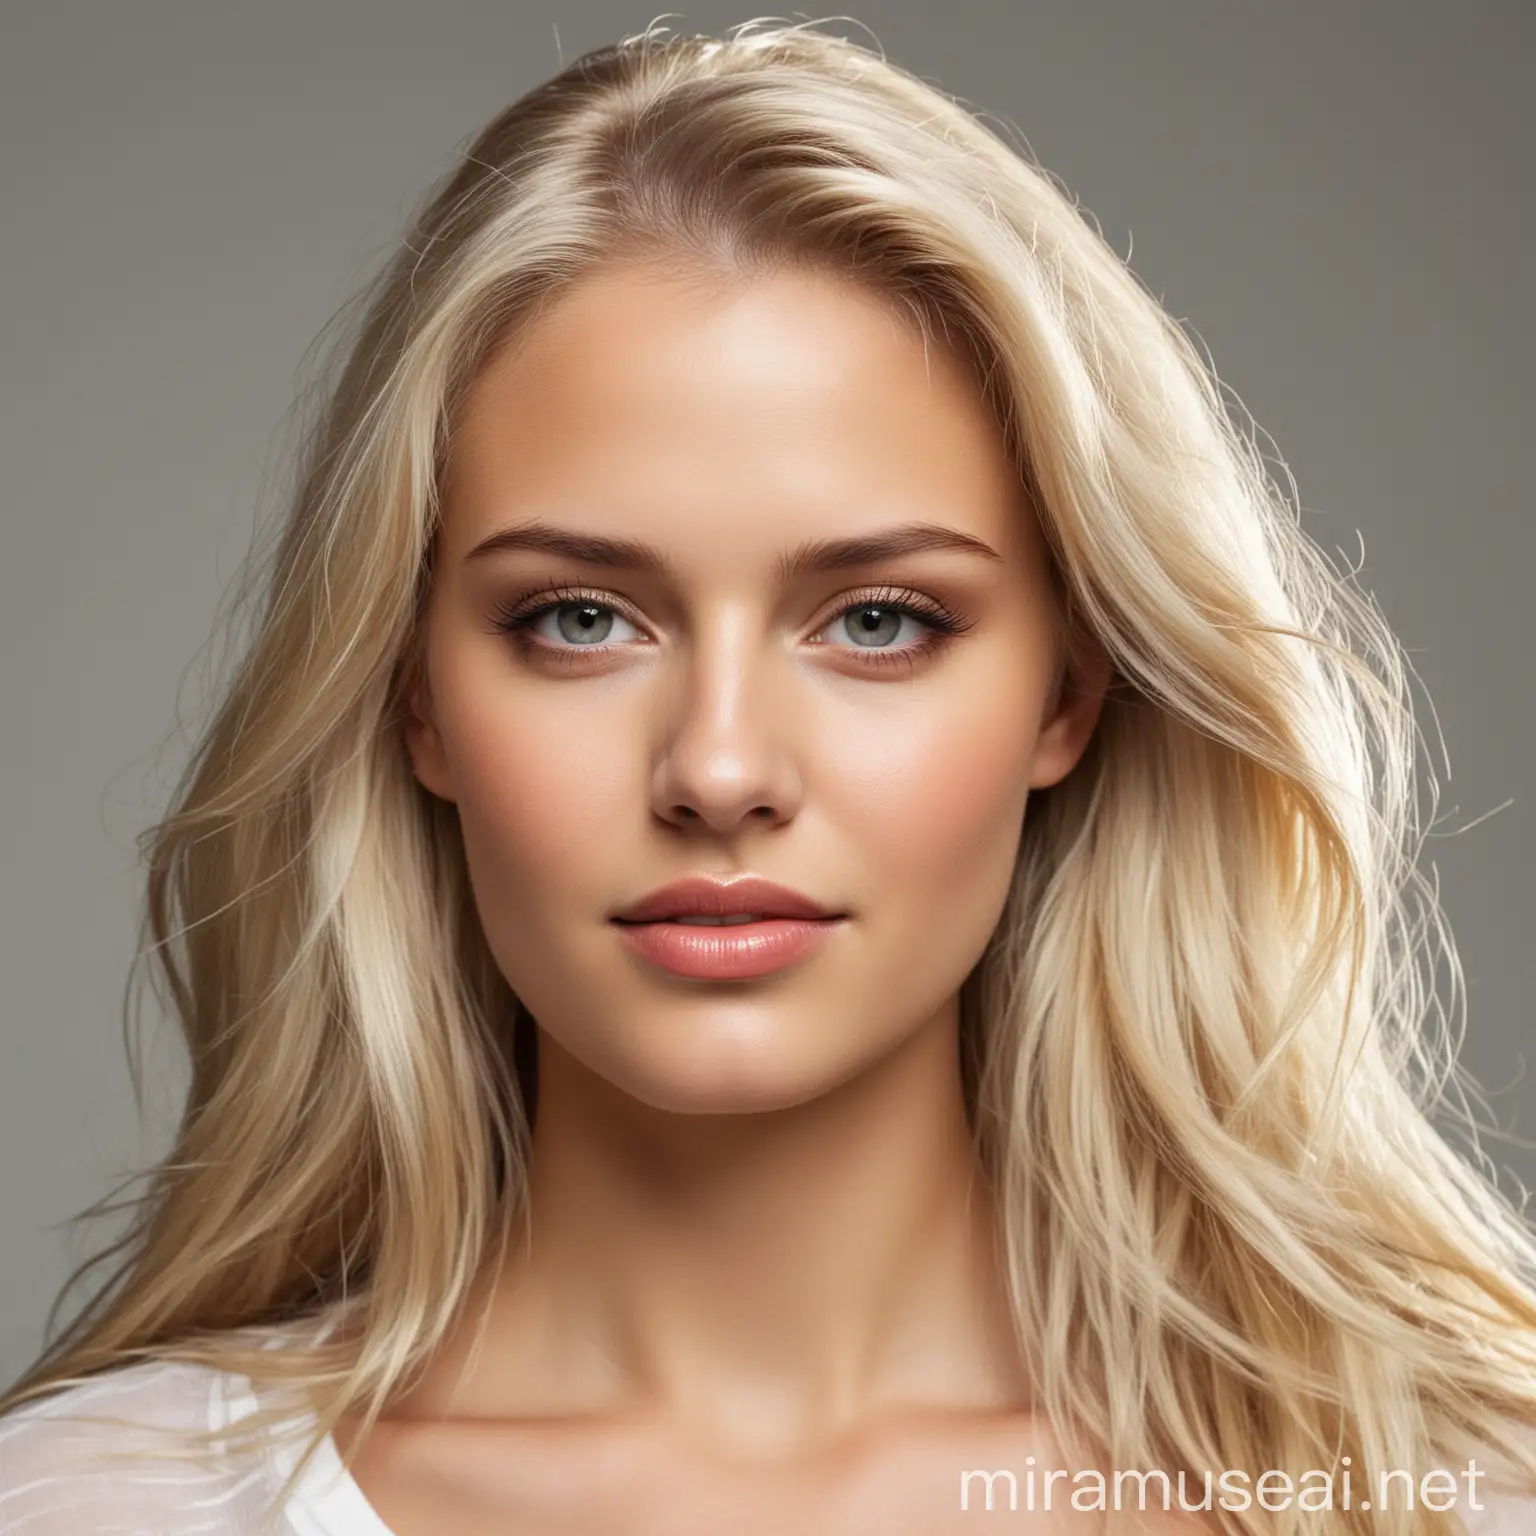 a blonde Caucasian female model with shiny hair